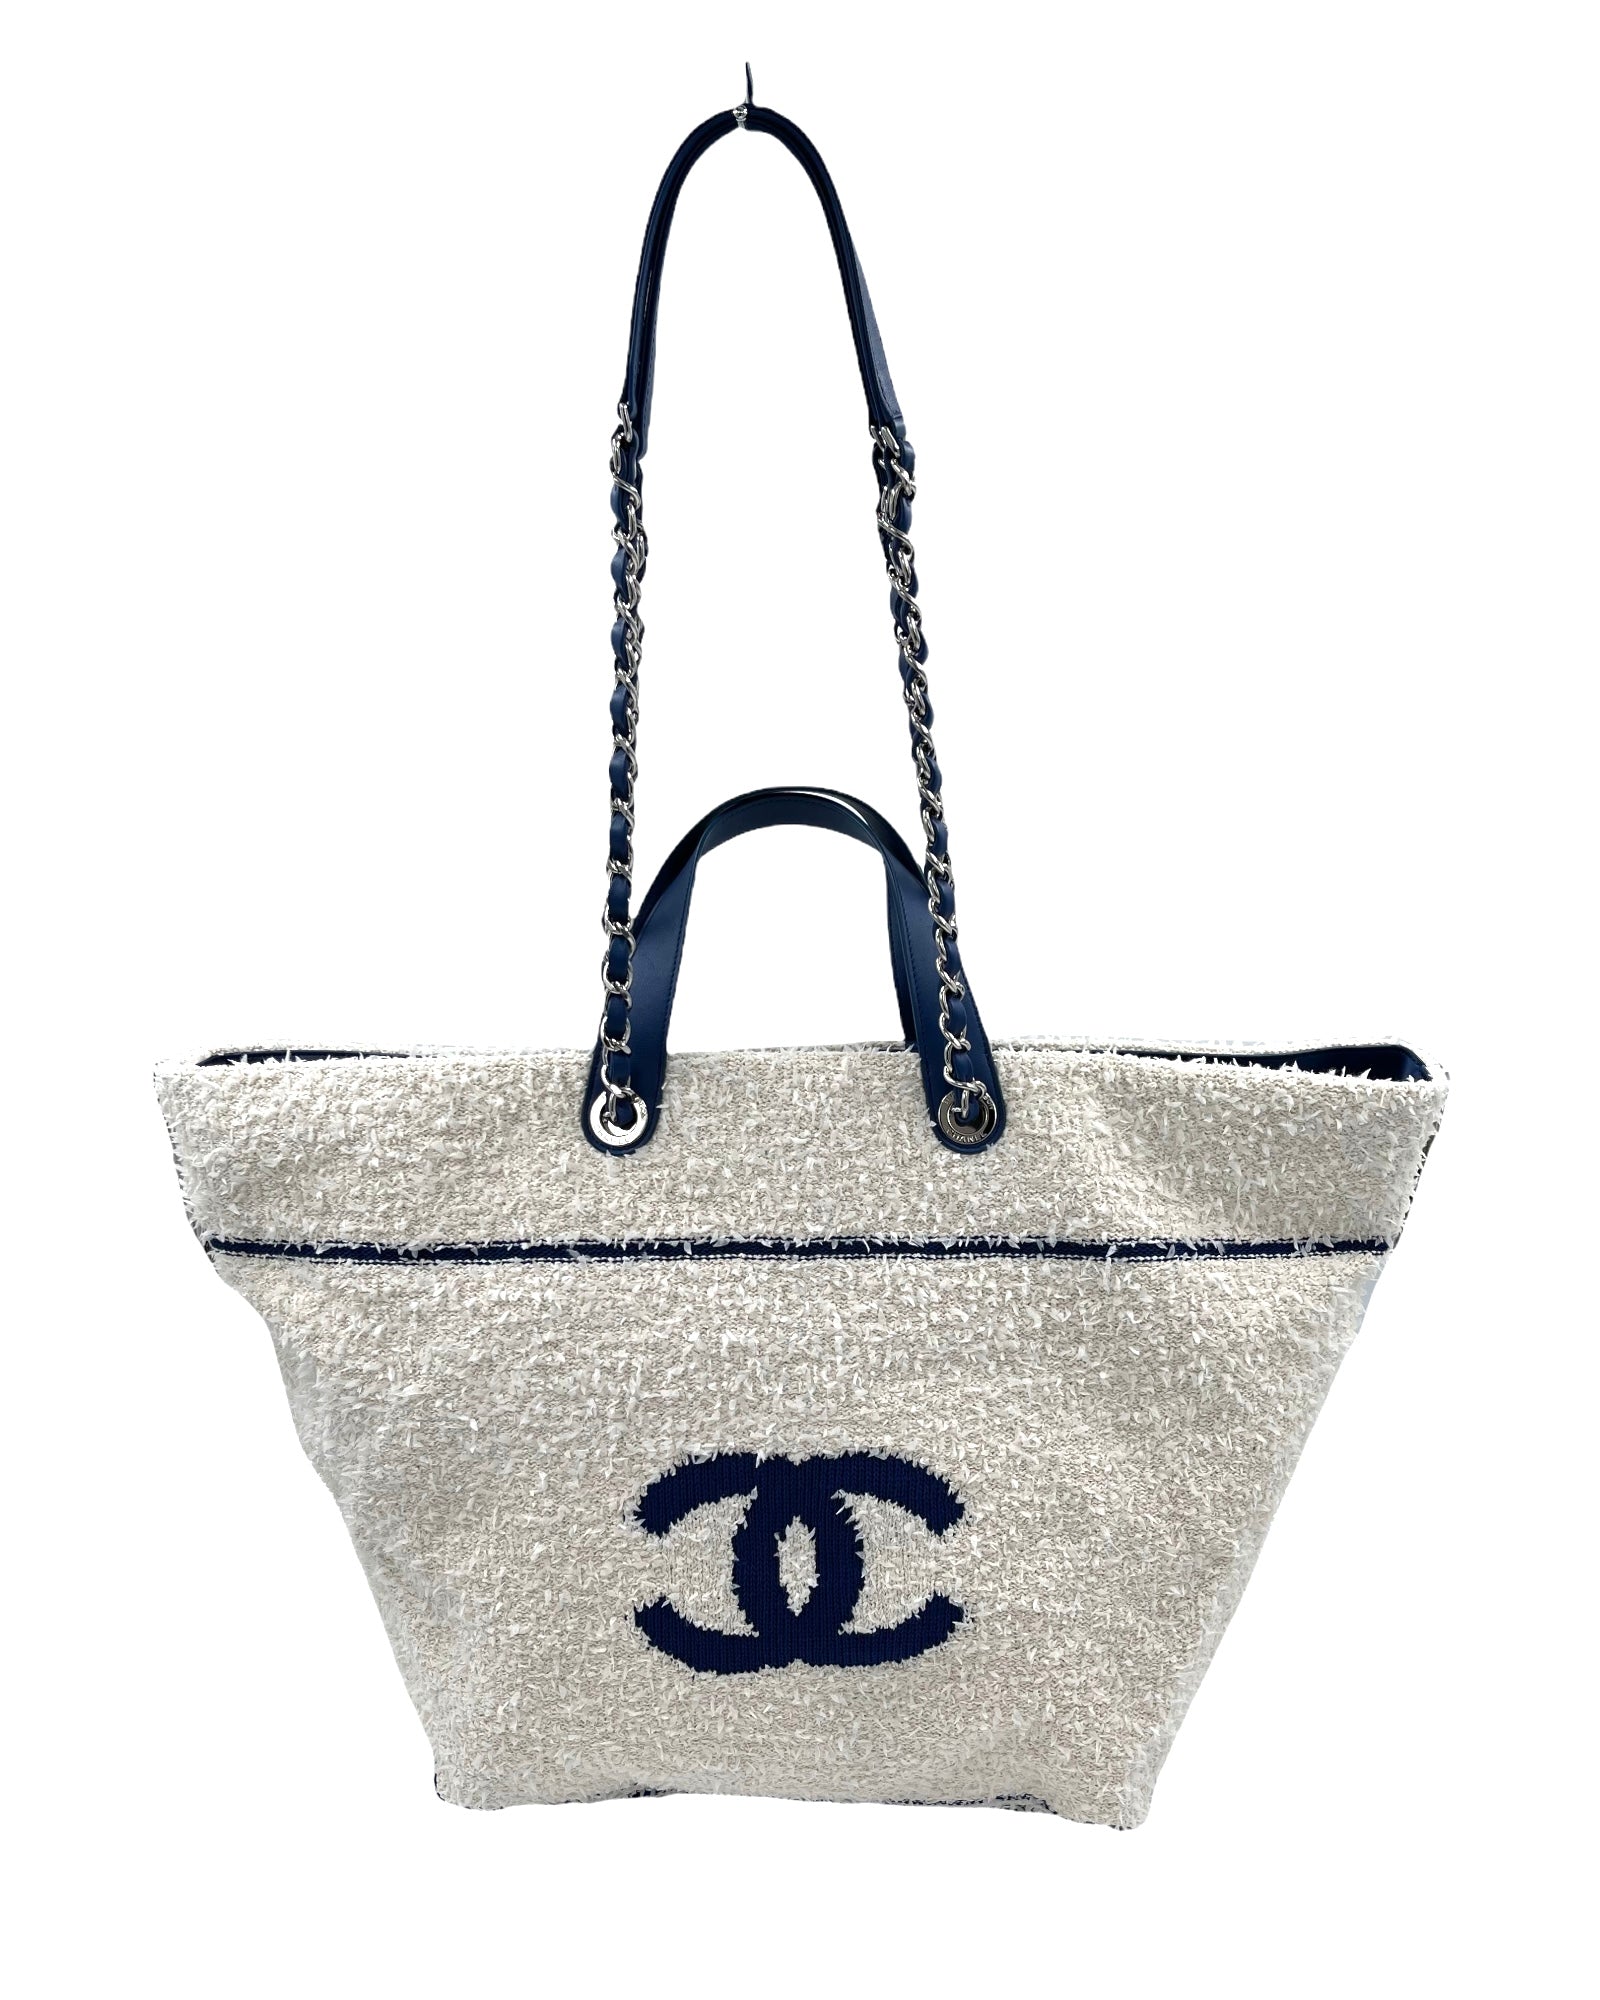 CHANEL Venise Biarritz Shopping Tote Terry Cloth Blue & White Large